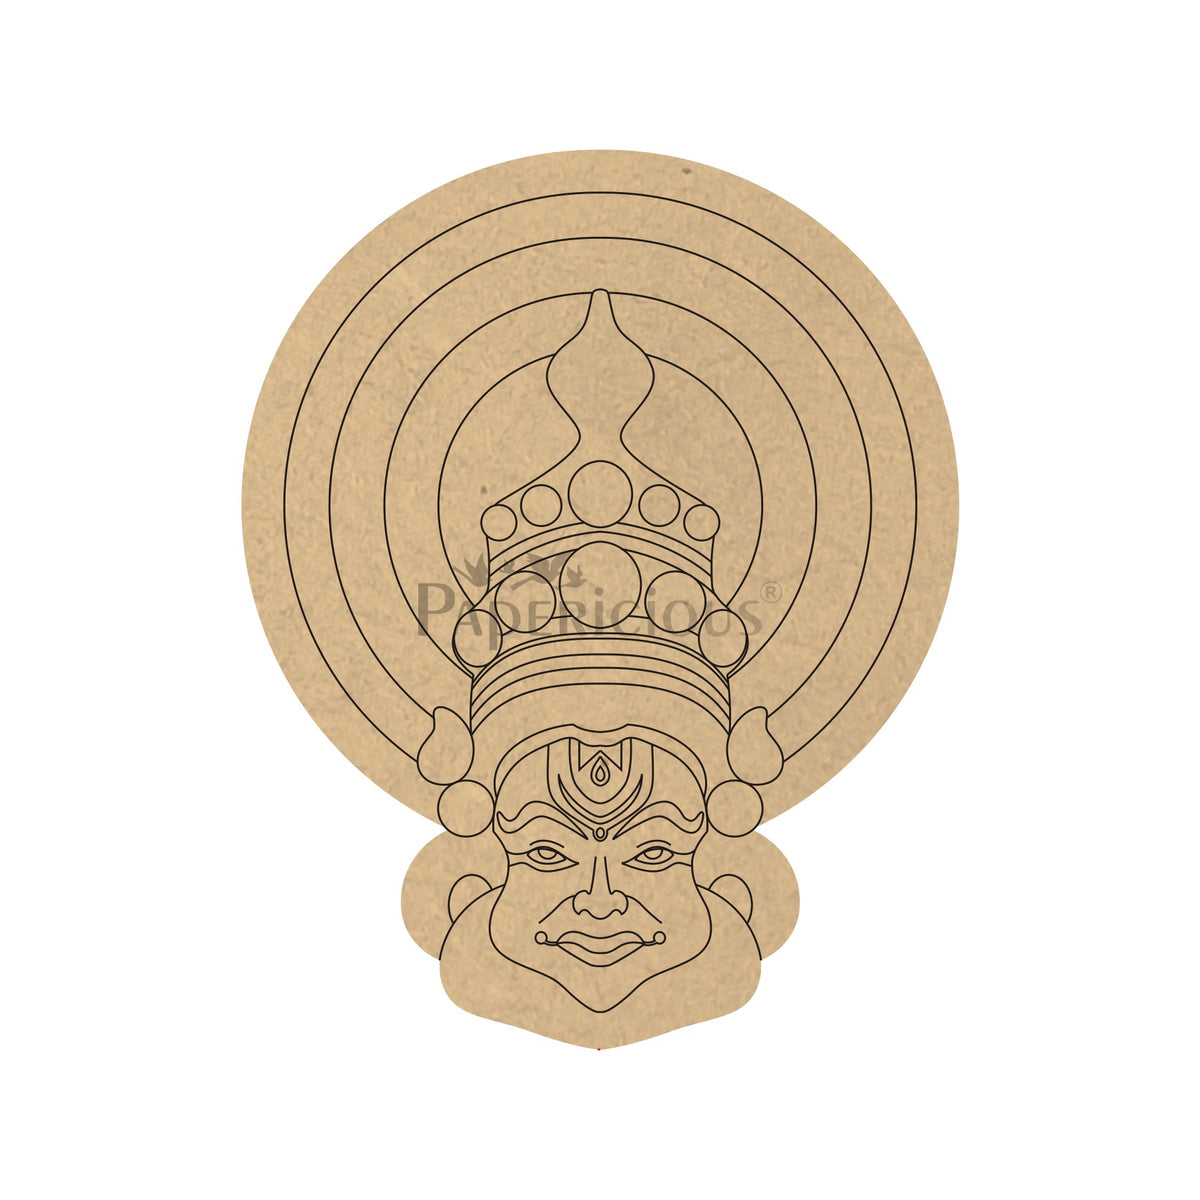 PAPERICIOUS 4mm thick Pre Marked MDF Base Kathakali